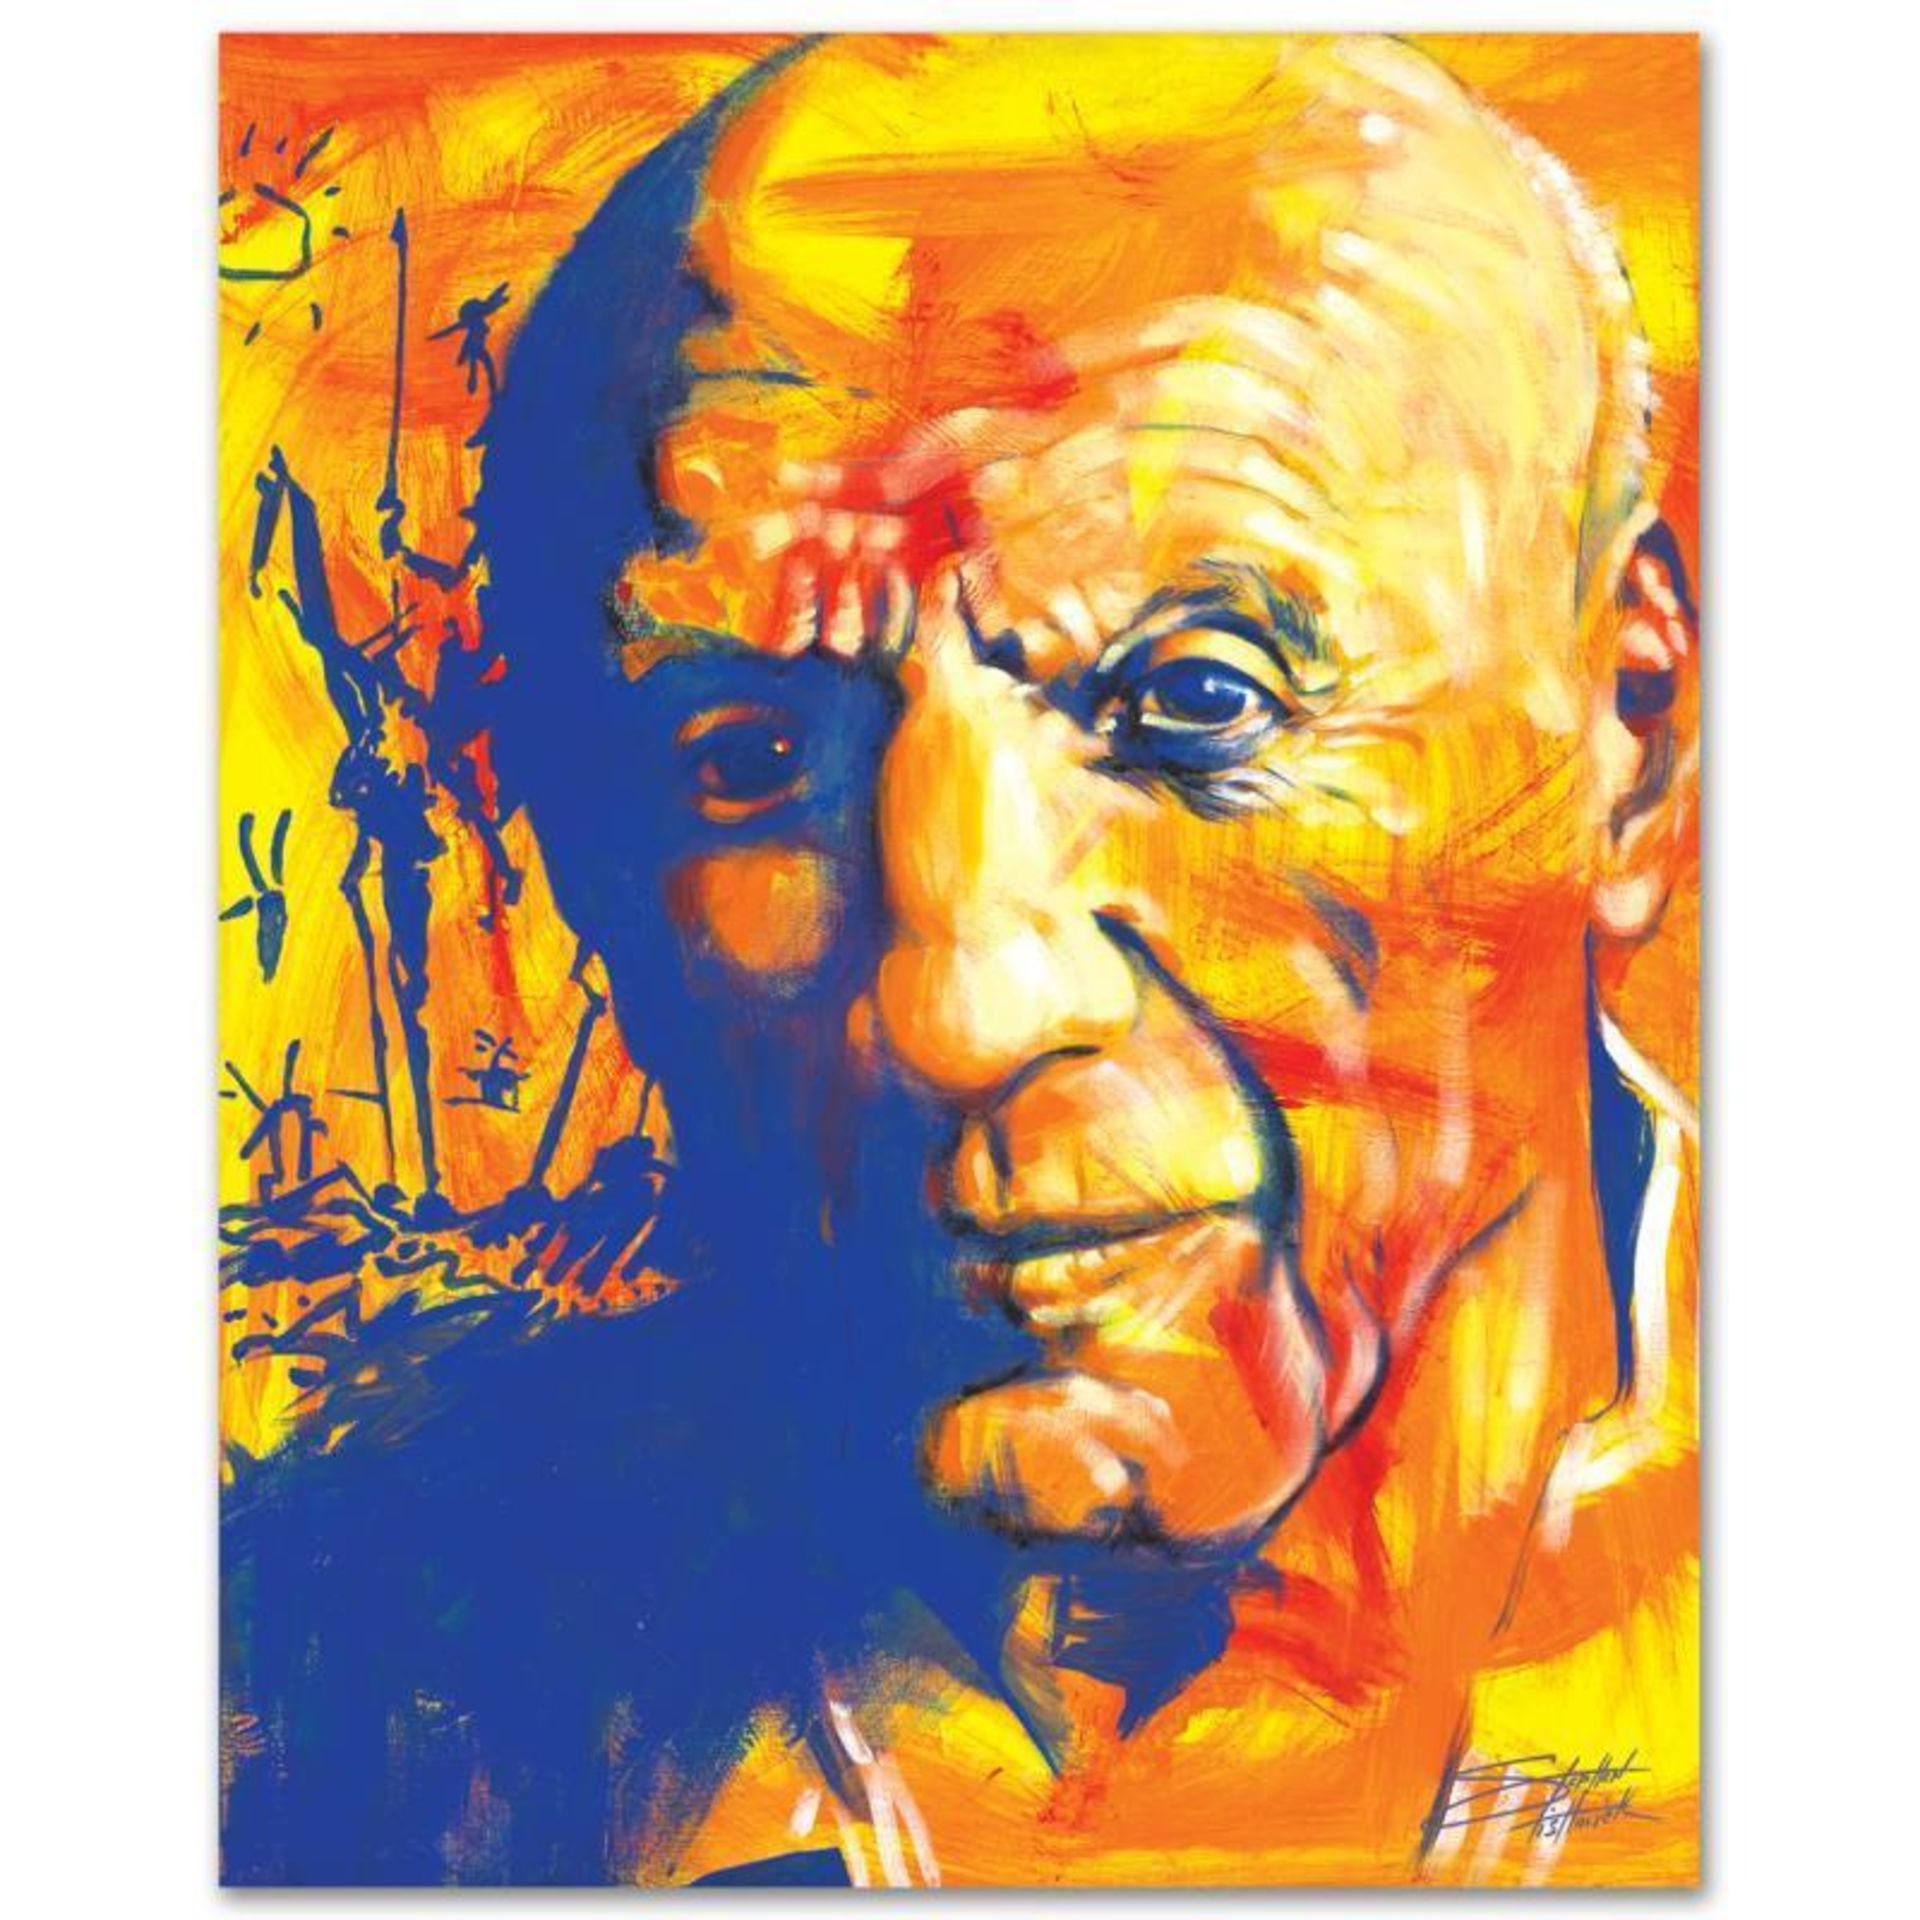 "Picasso" Limited Edition Giclee on Canvas by Stephen Fishwick, Numbered and Sig